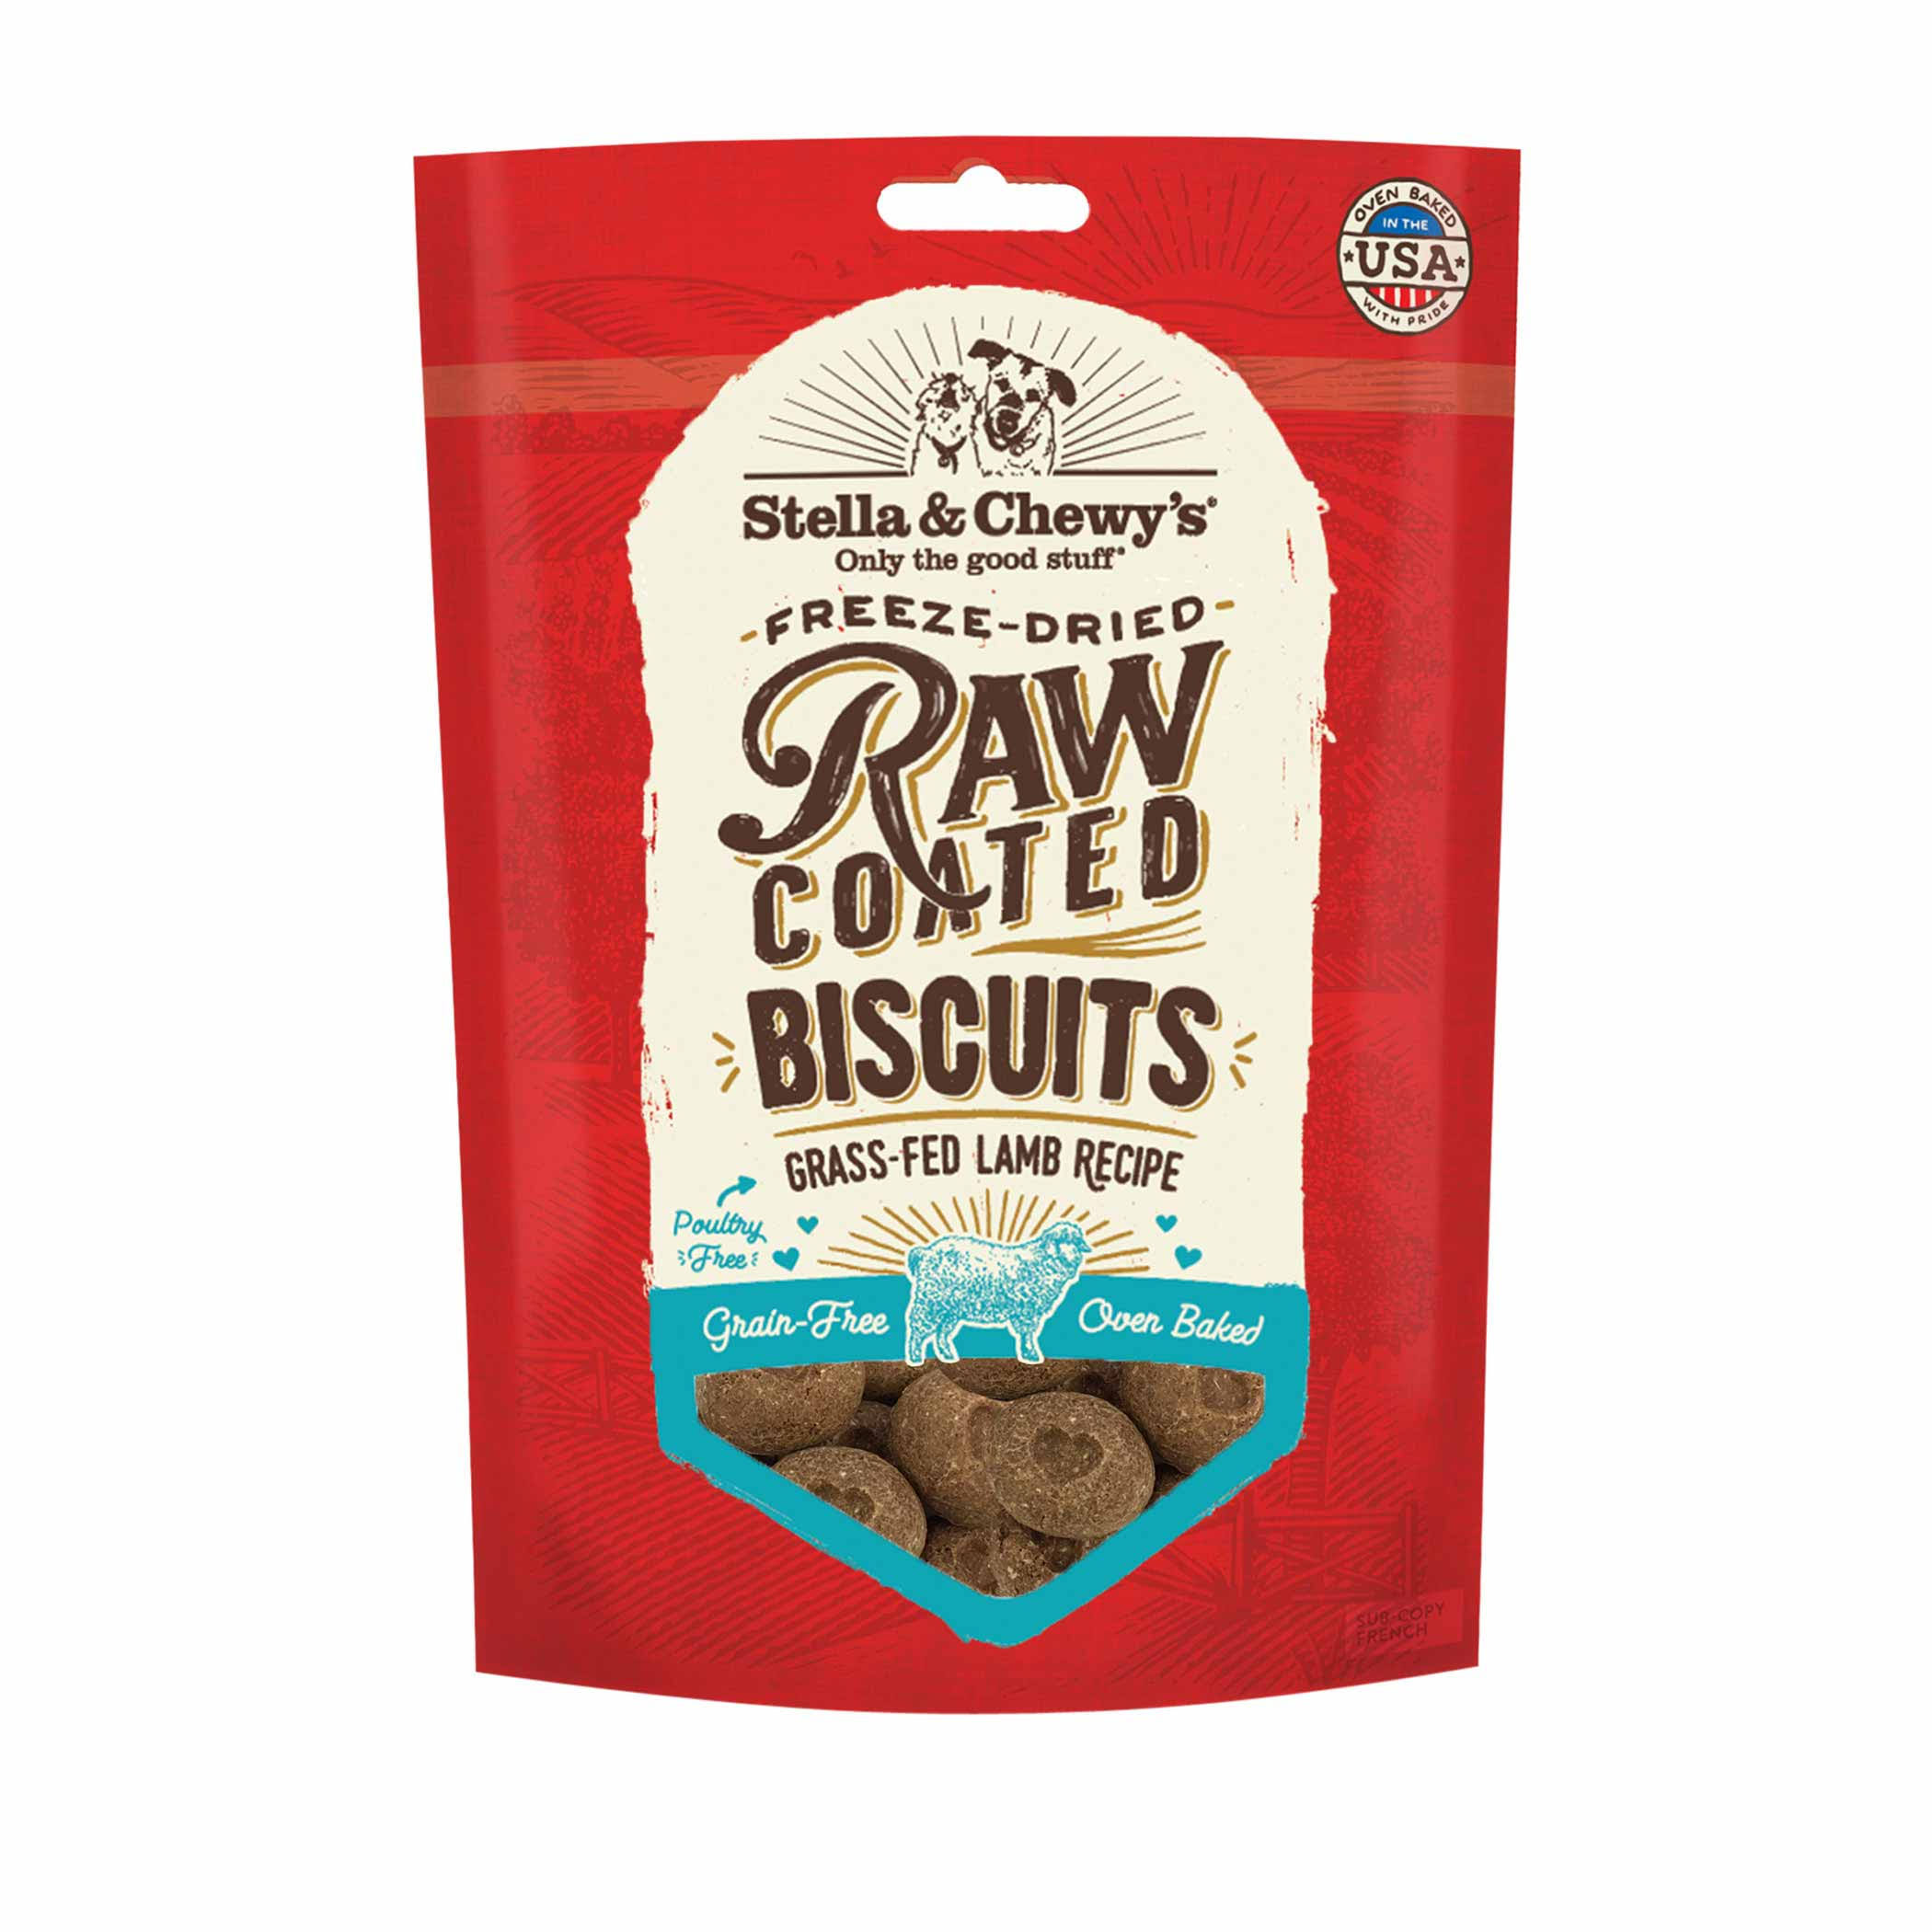 Stella & Chewy's Grass-Fed Lamb Raw Coated Biscuits - 9 oz